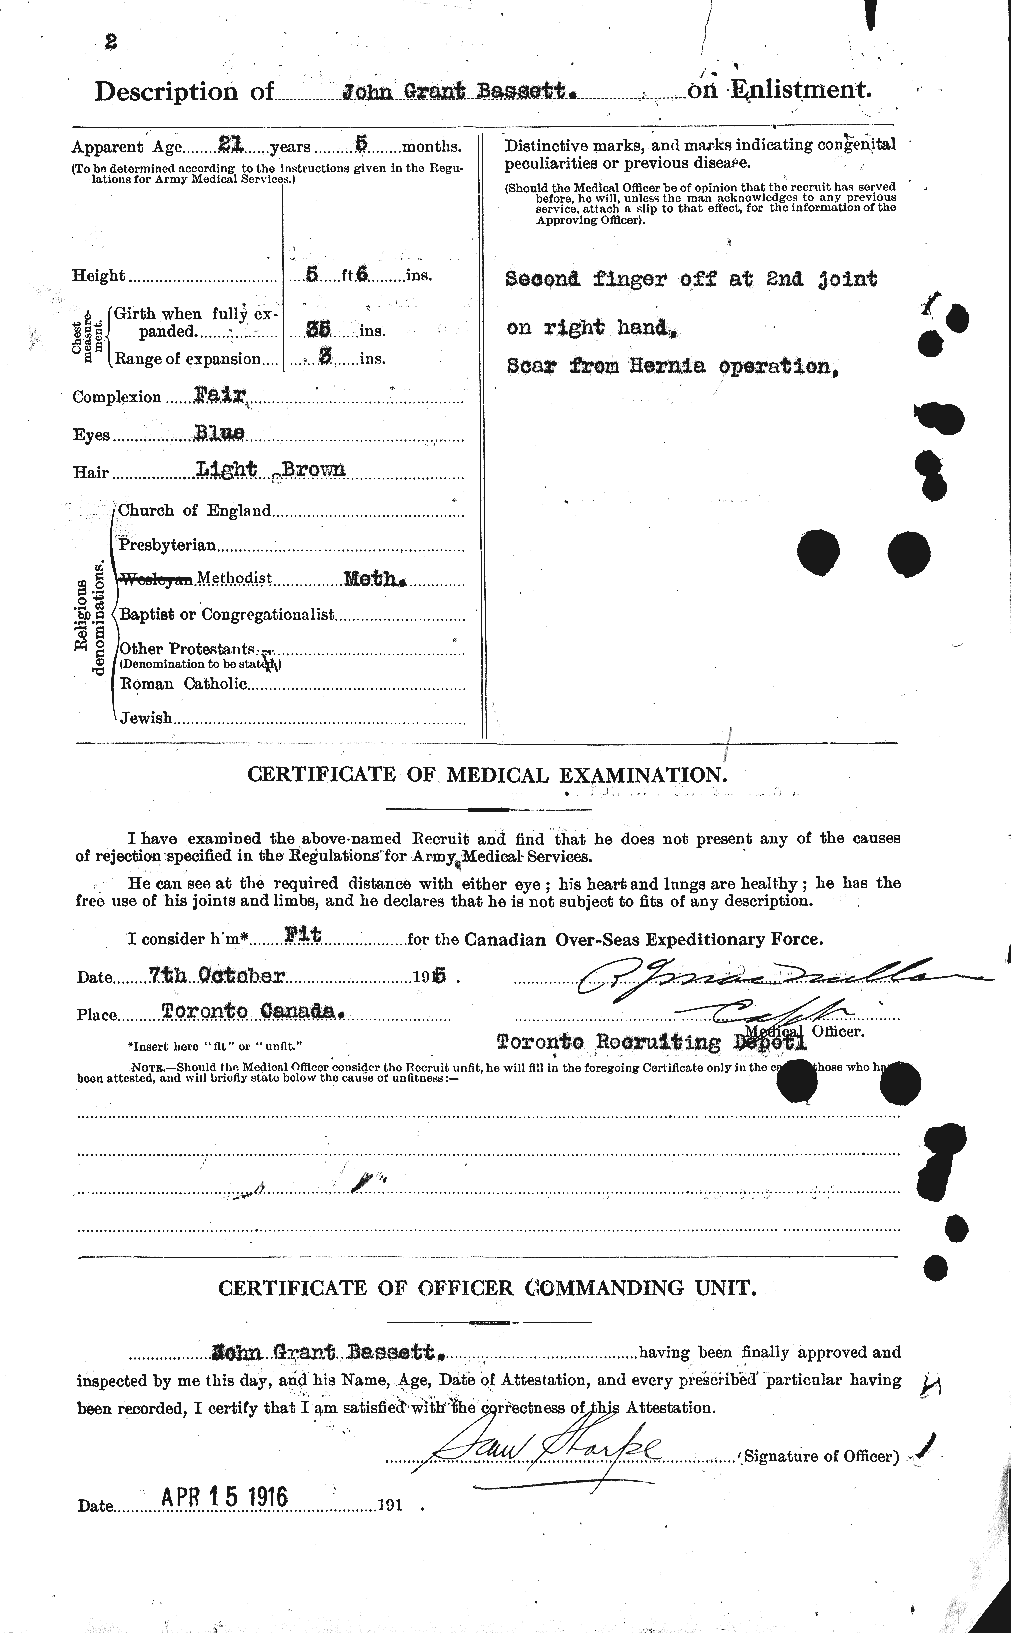 Personnel Records of the First World War - CEF 221054b